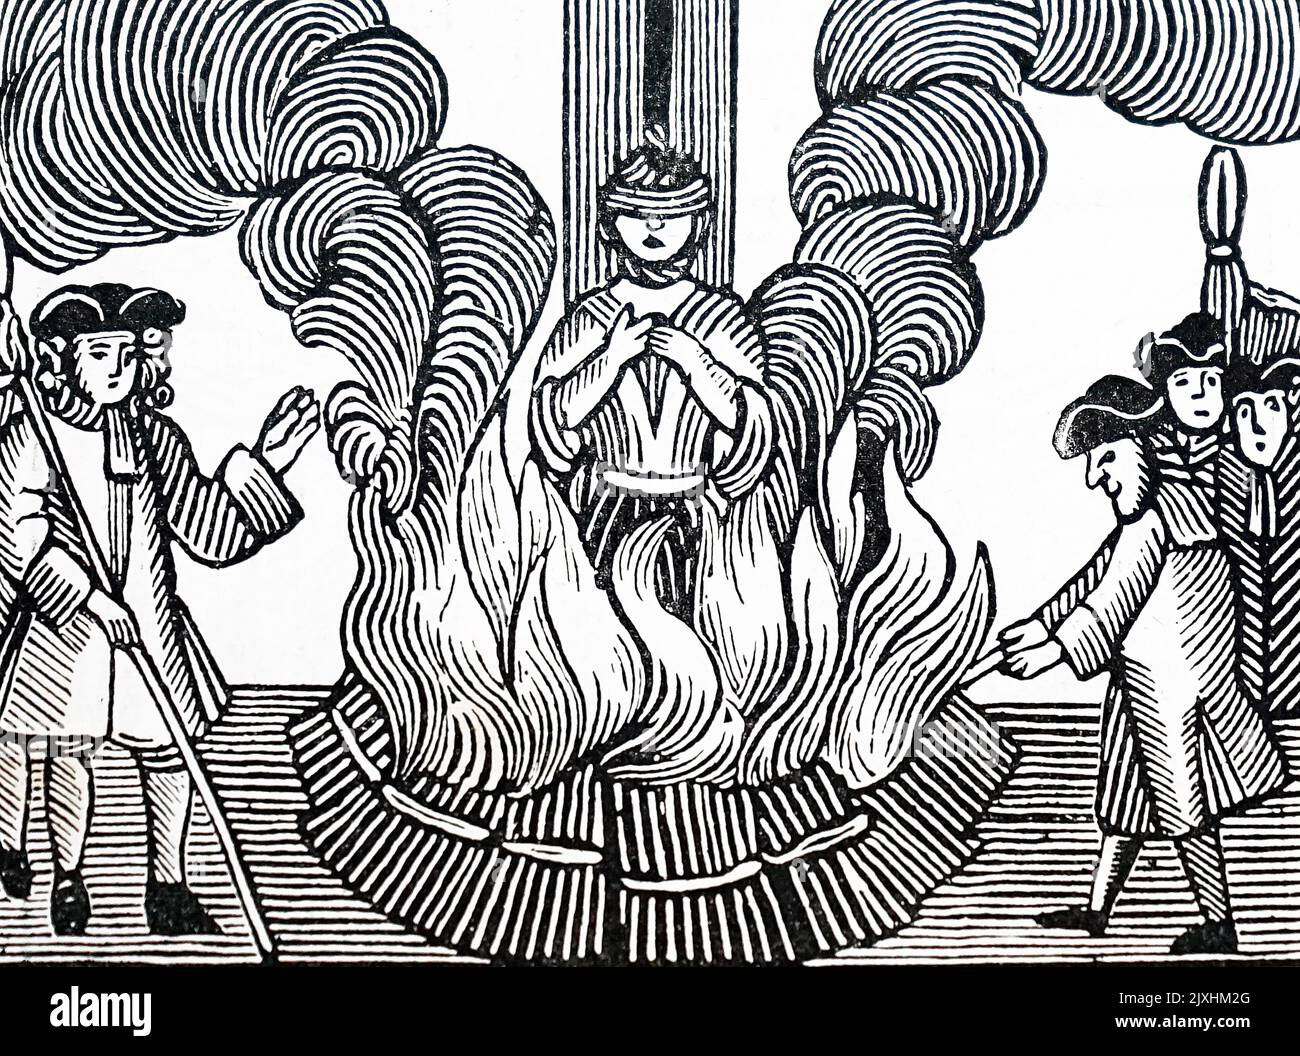 Woodcut depicting the last execution by burning at the stake in England. The Christian bowman (woman) was first hanged, then burned as a punishment for counterfeiting, which was classified as high treason. Dated 18th Century Stock Photo